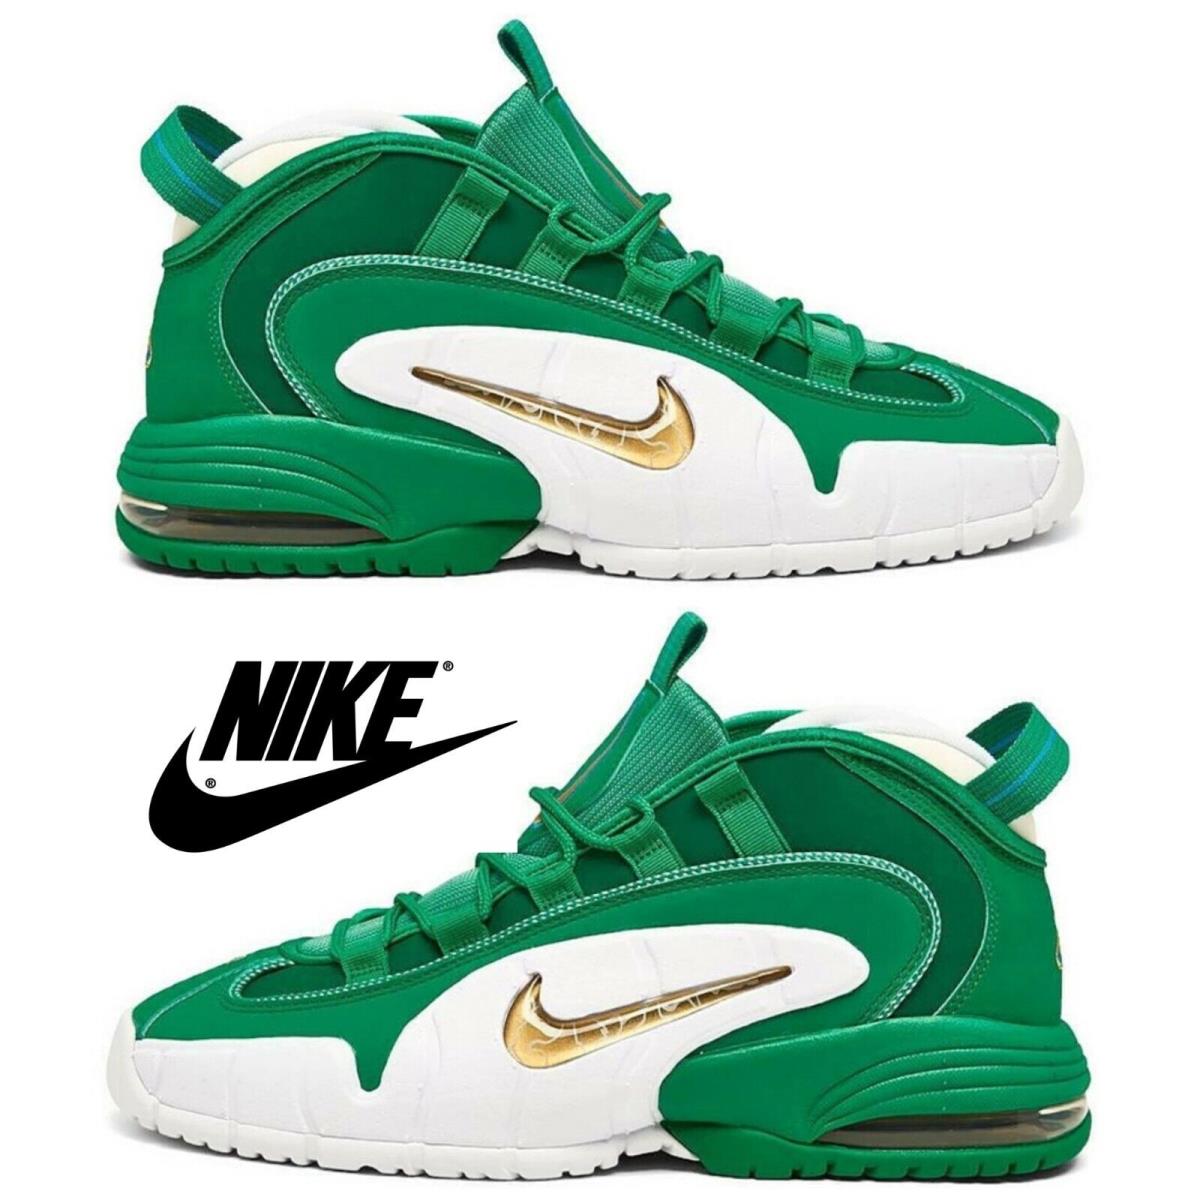 Nike Air Max Penny 1 Men`s Basketball Sneakers Comfort Lightweight Court Shoes